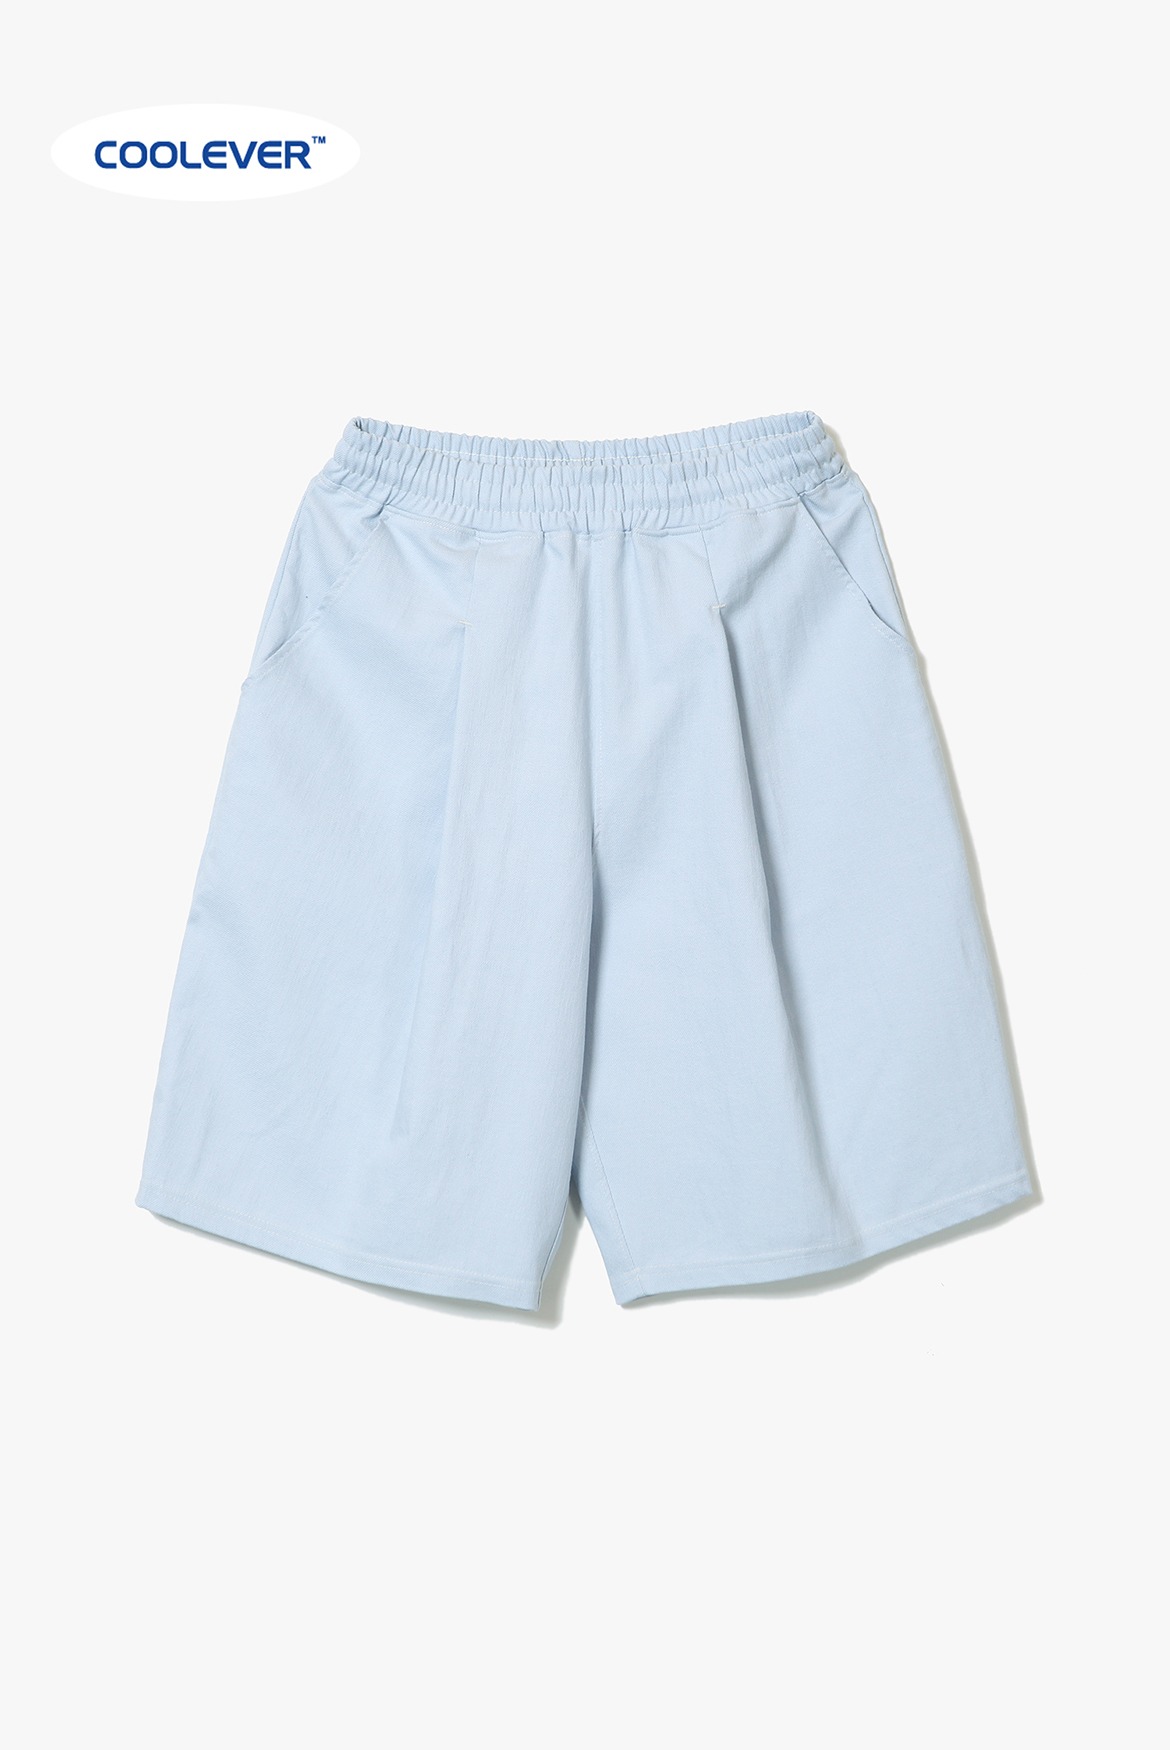 Clean Coolever Tuck Banding Shorts [White Blue]